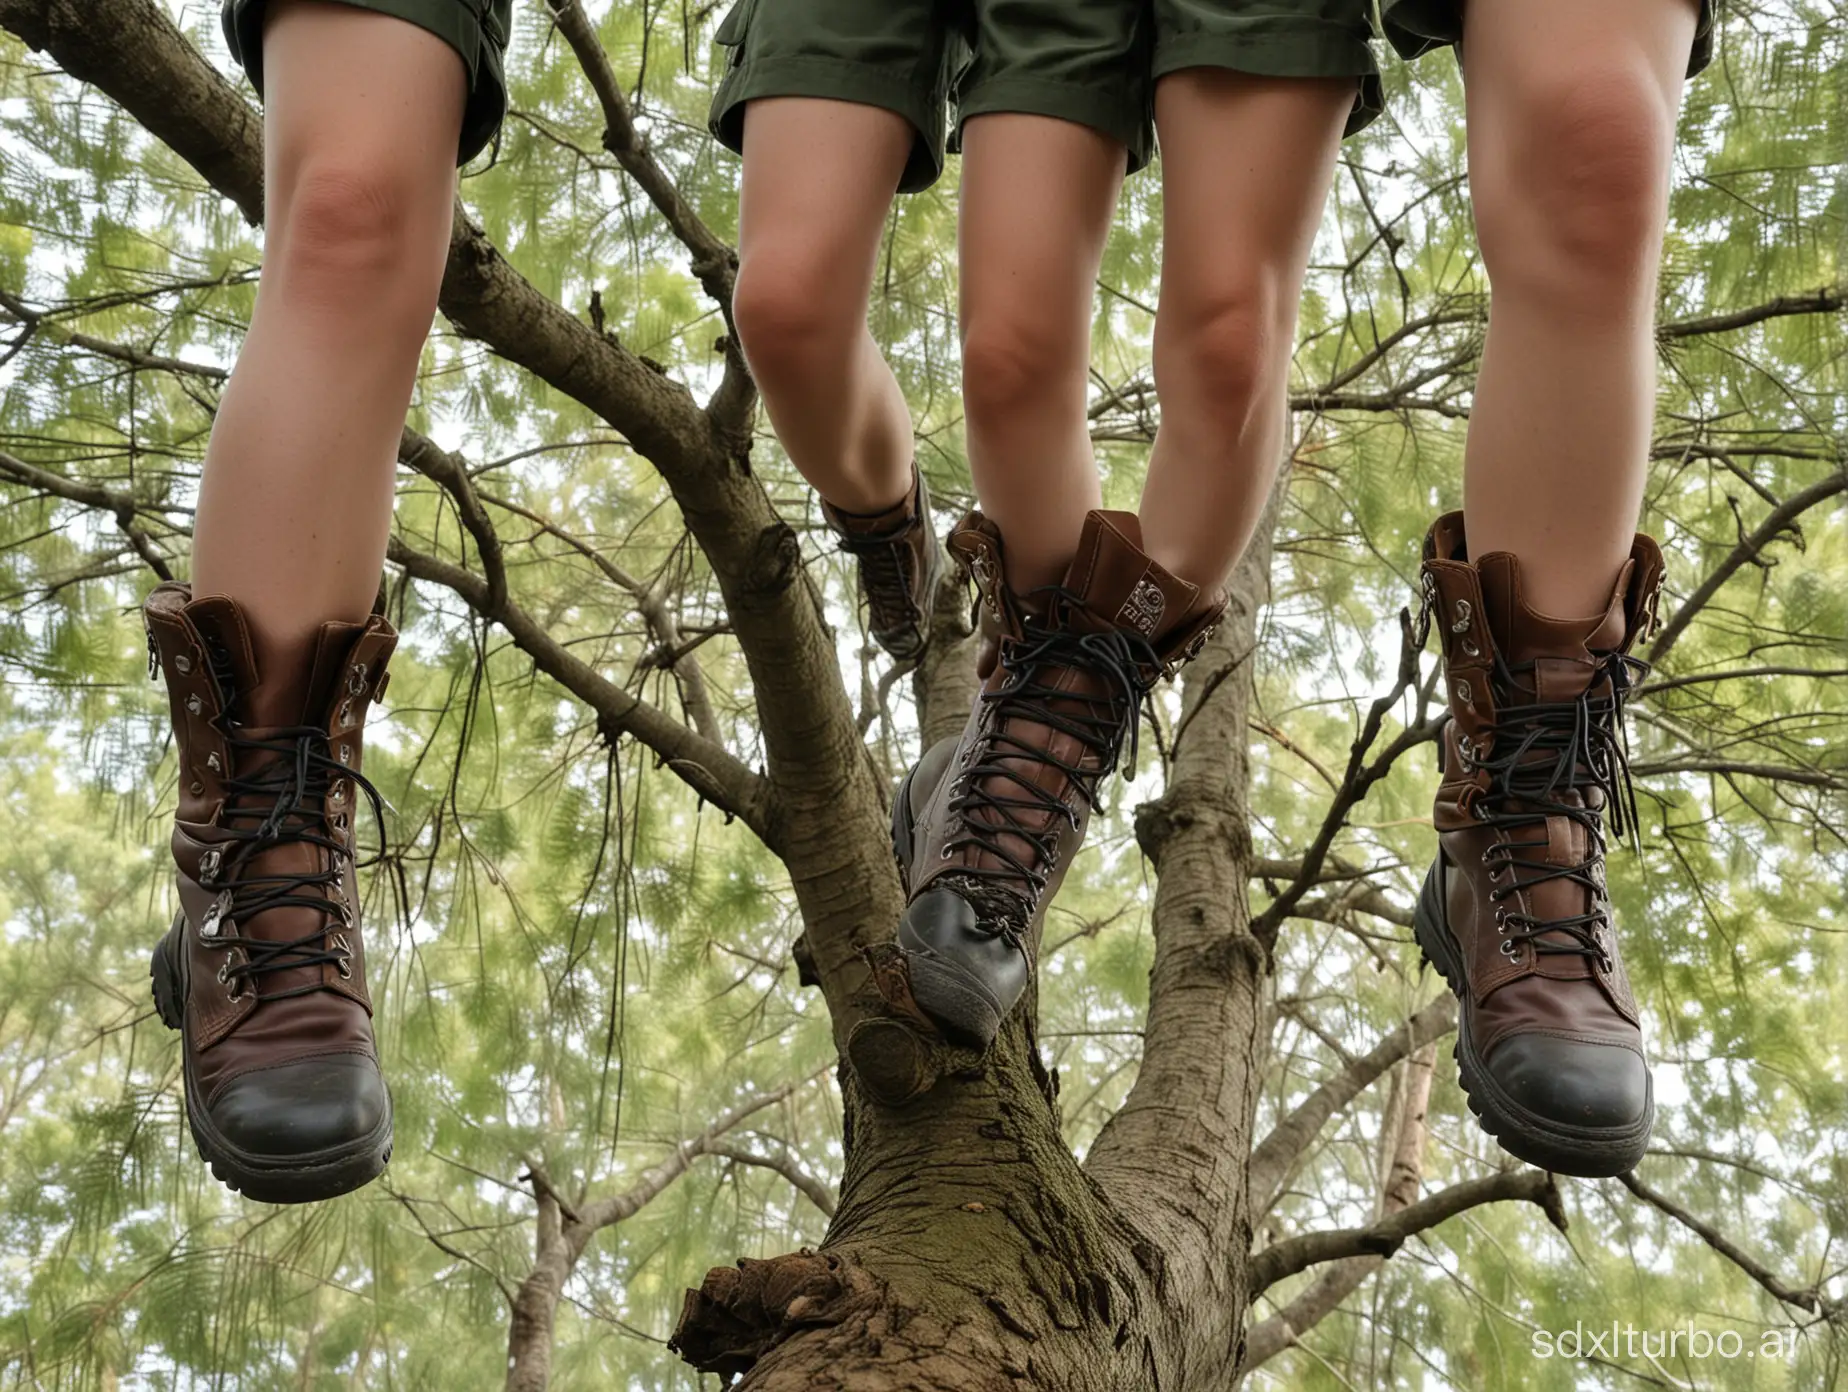 Pathfinder-Boys-Sitting-on-Tree-Branch-CloseUp-Low-Angle-View